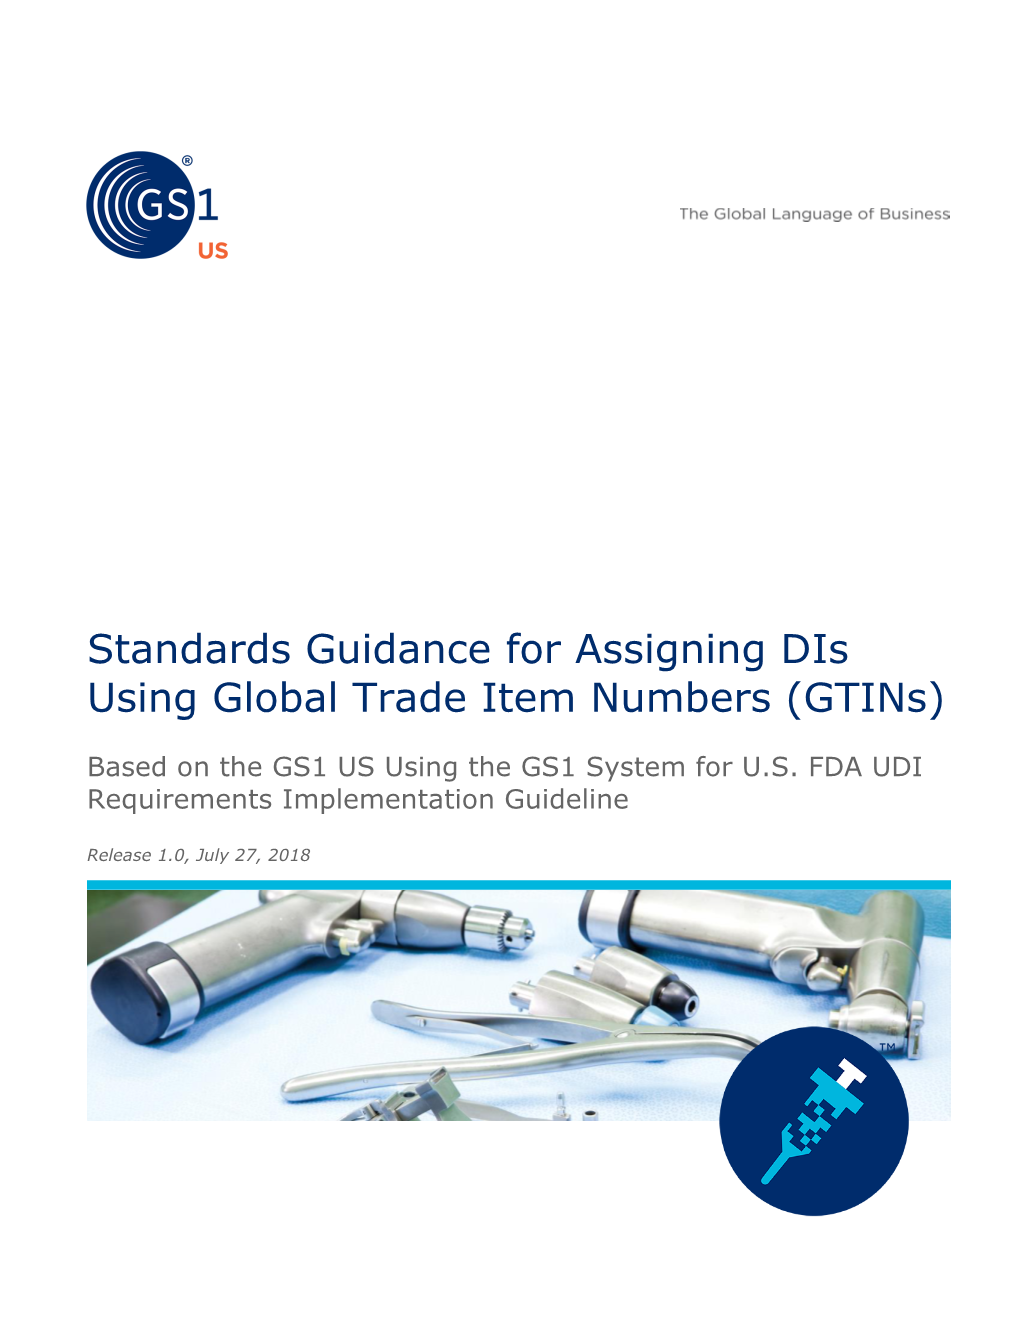 Standards Guidance for Assigning Dis Using Global Trade Item Numbers (Gtins)